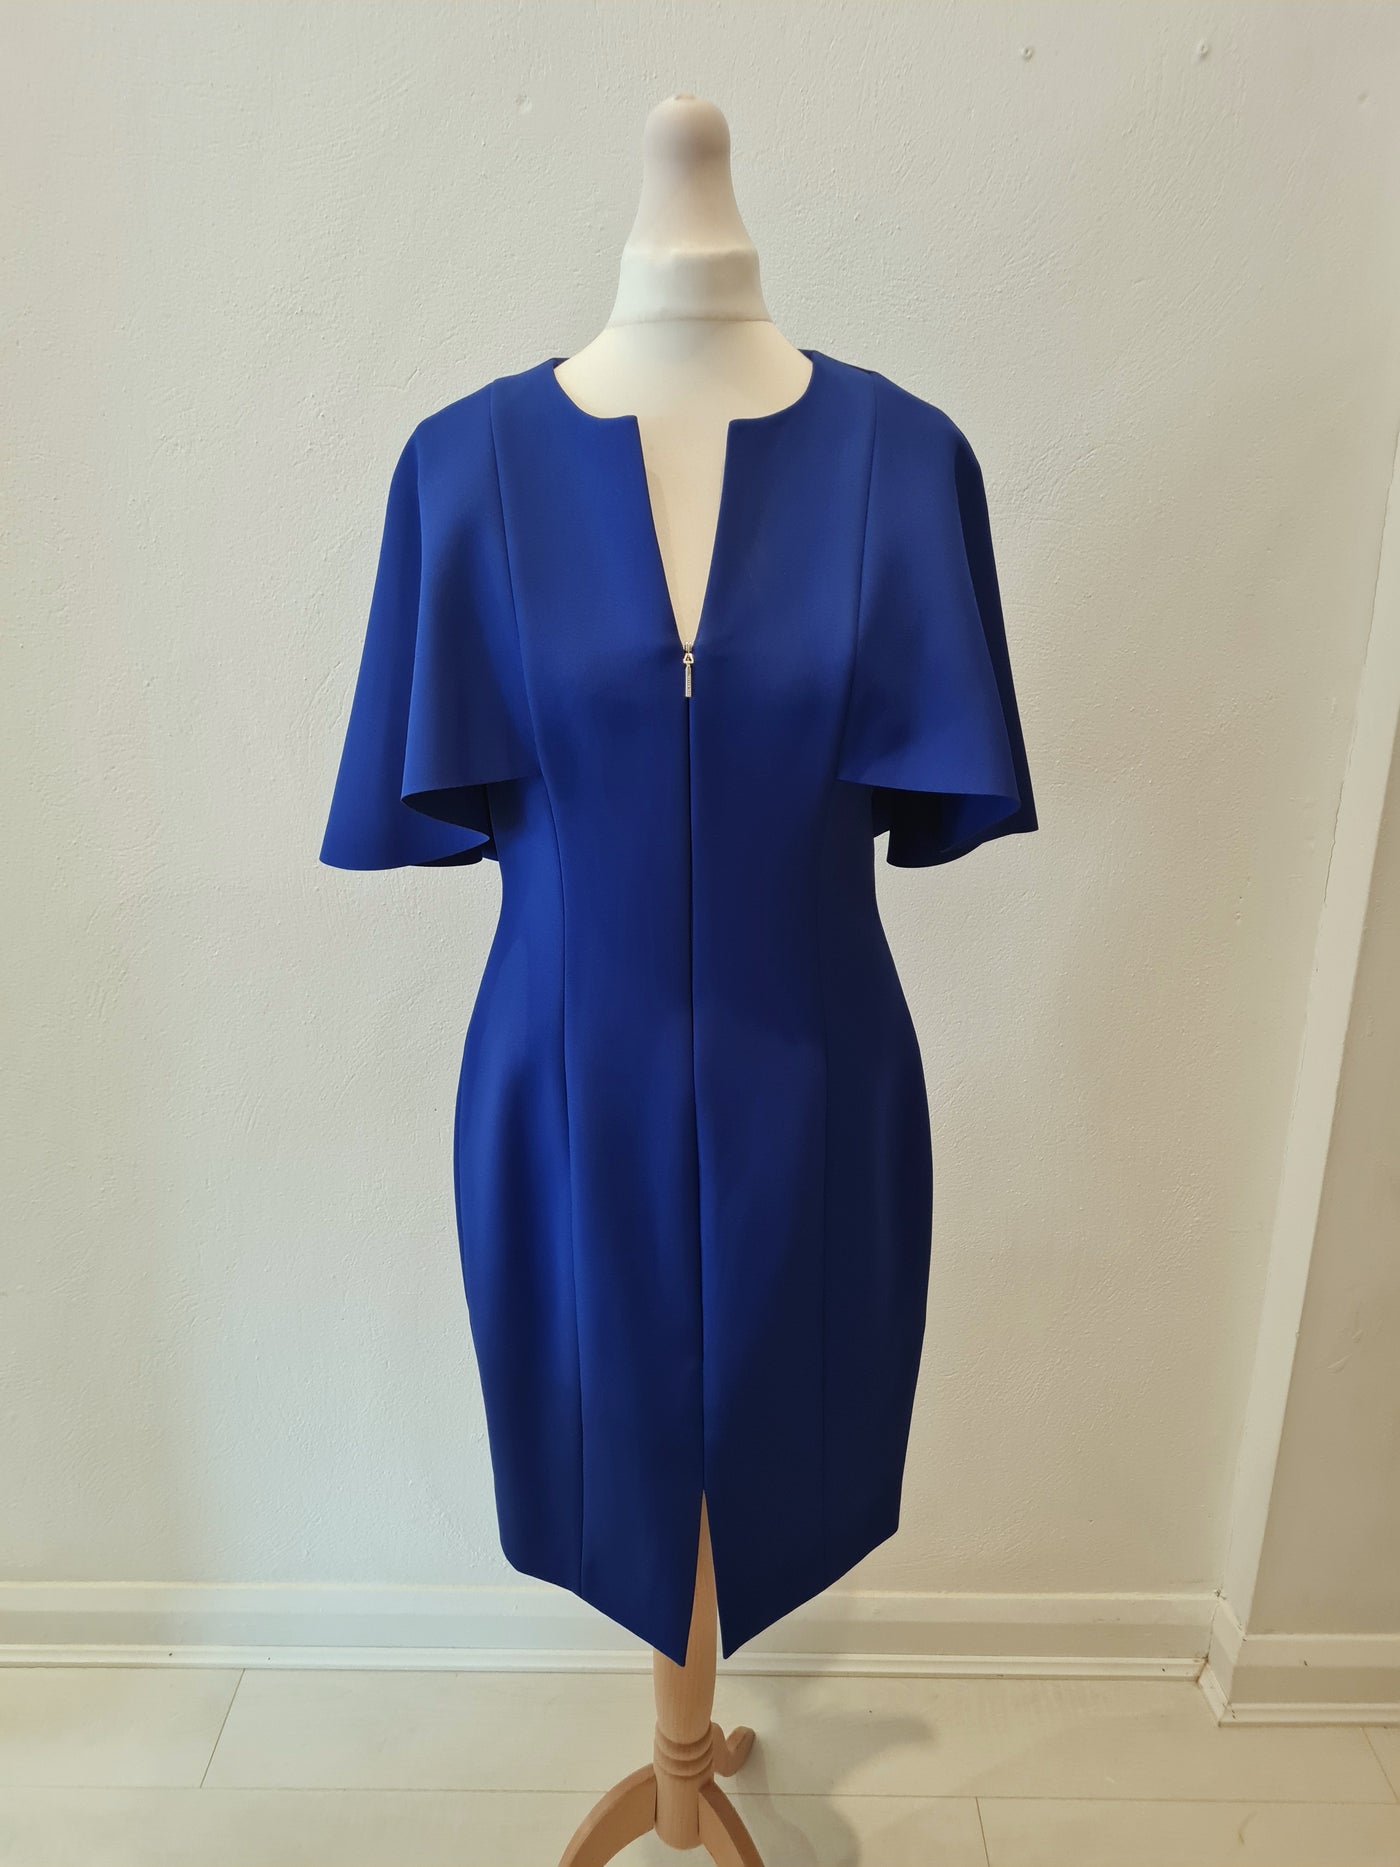 Ted Baker Baker Blue Cape Bodycon 2 New RRP £189